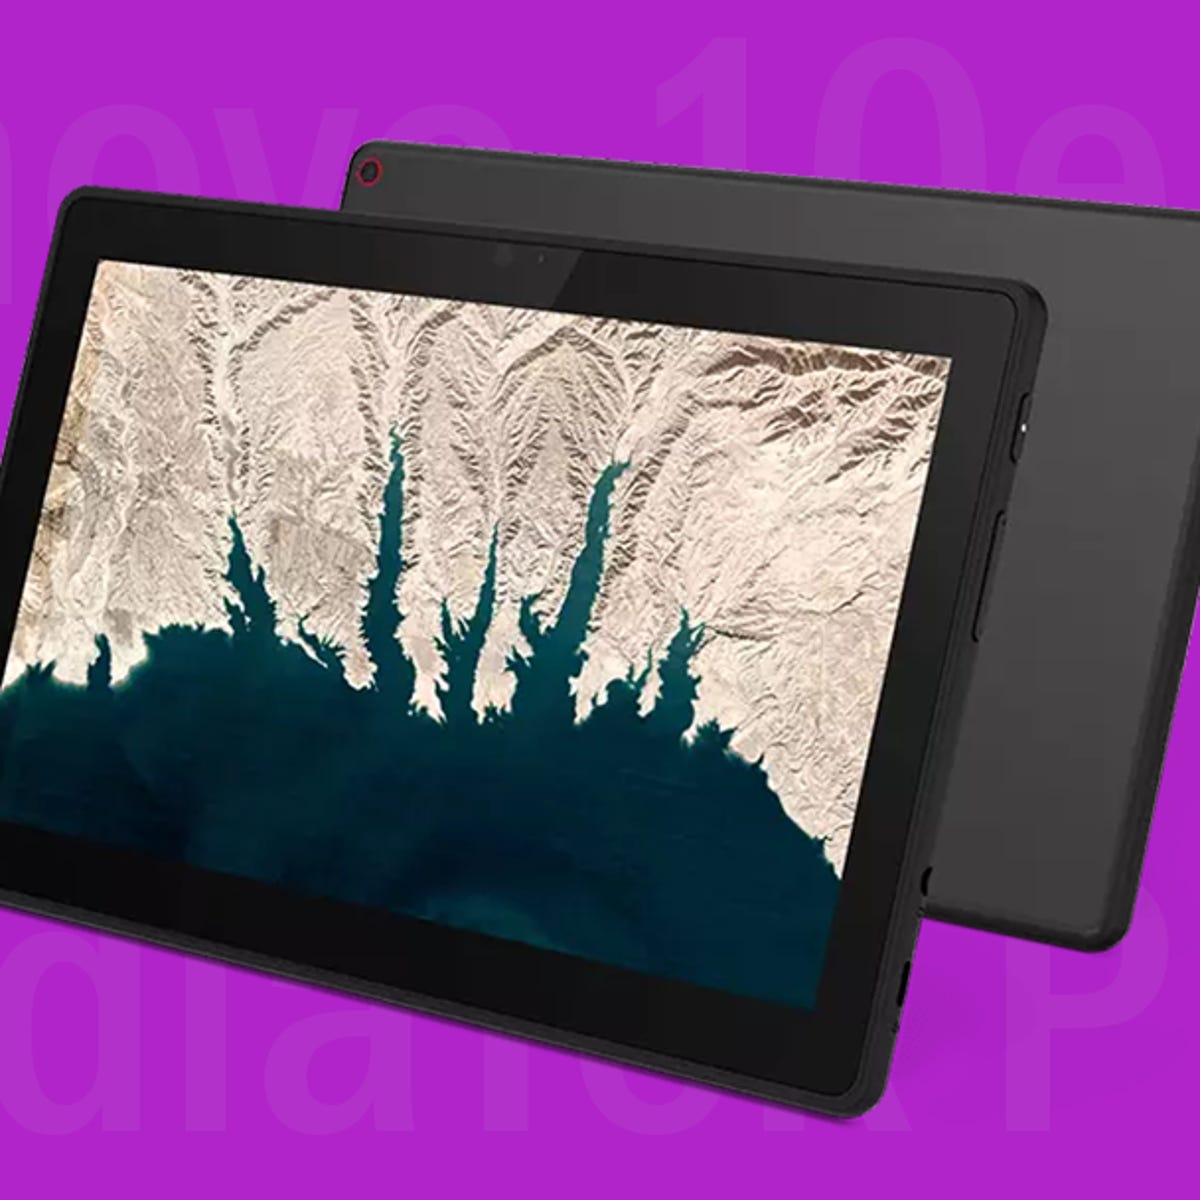 Deal alert: Lenovo's $300 Chromebook tablet is still discounted to $99